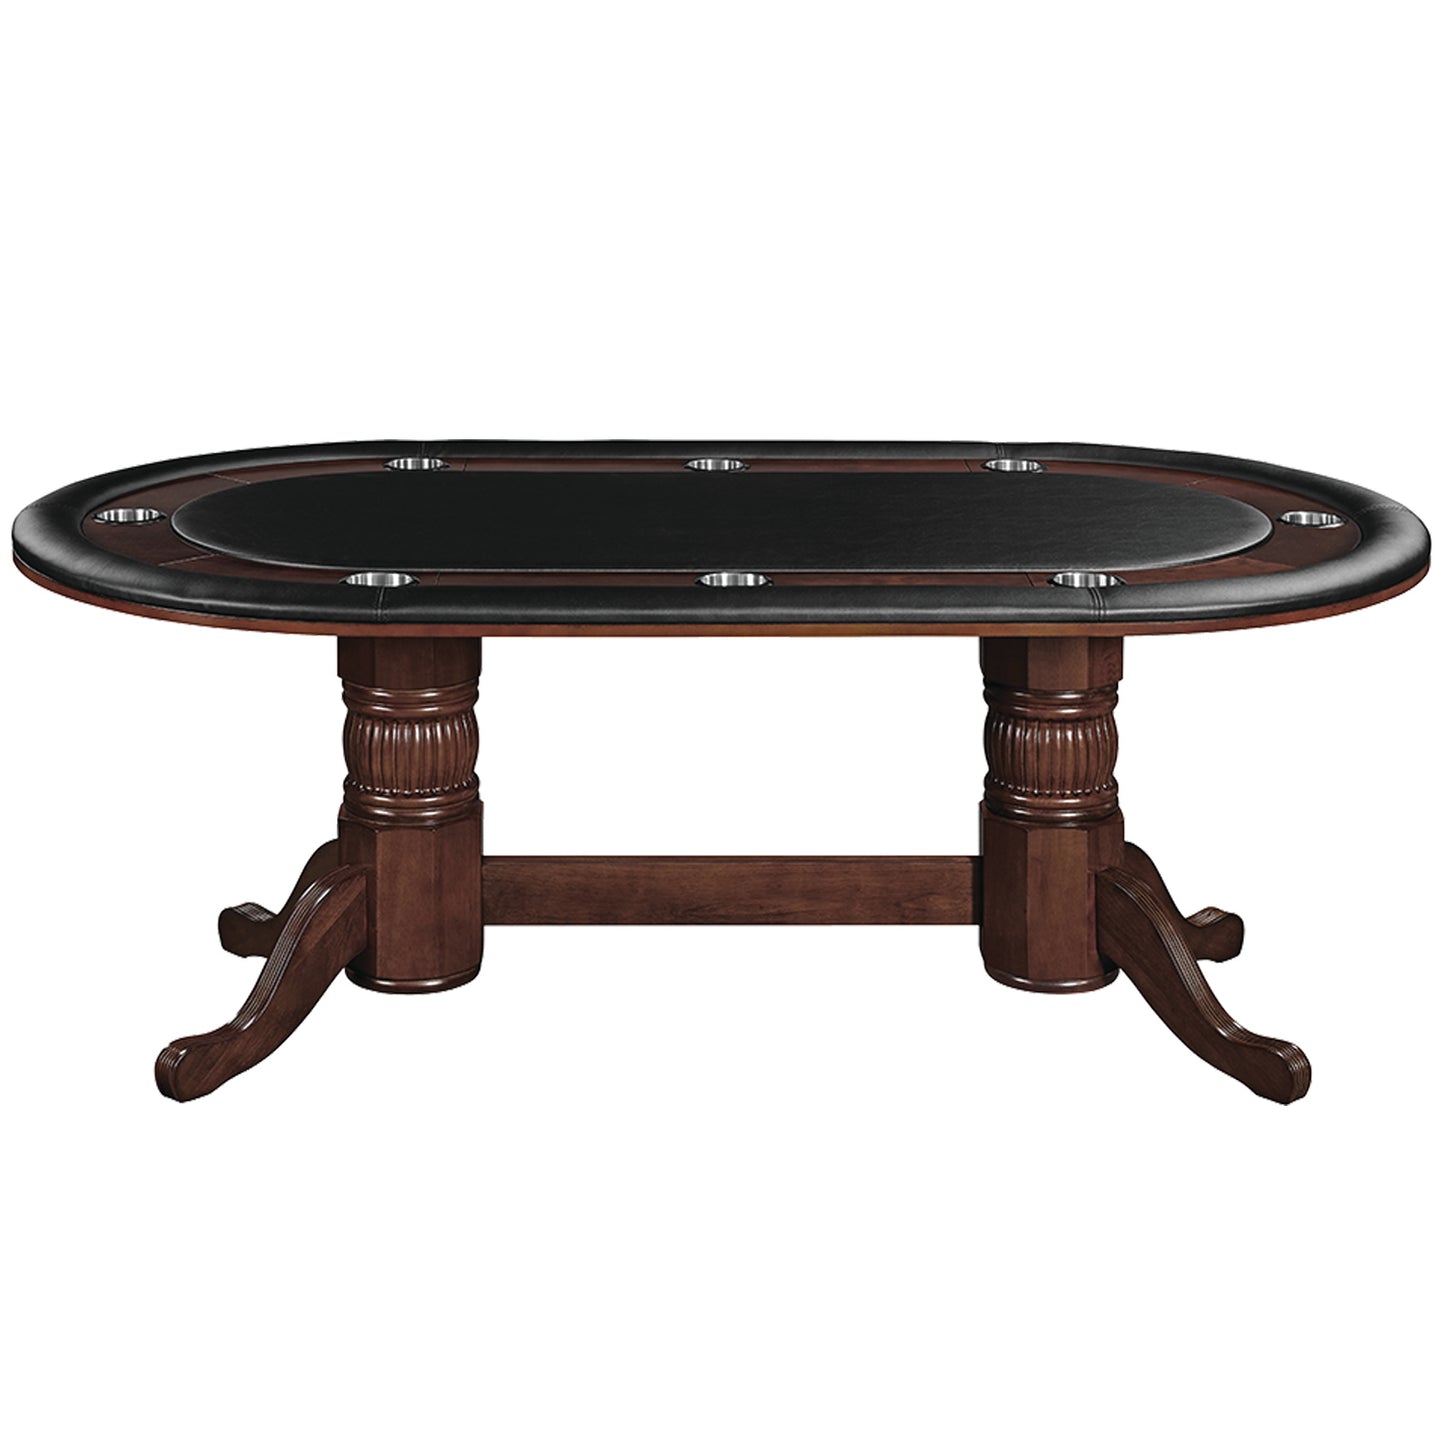 84 inch solid wood poker table with padded black vinyl game top in a cappuccino finish.